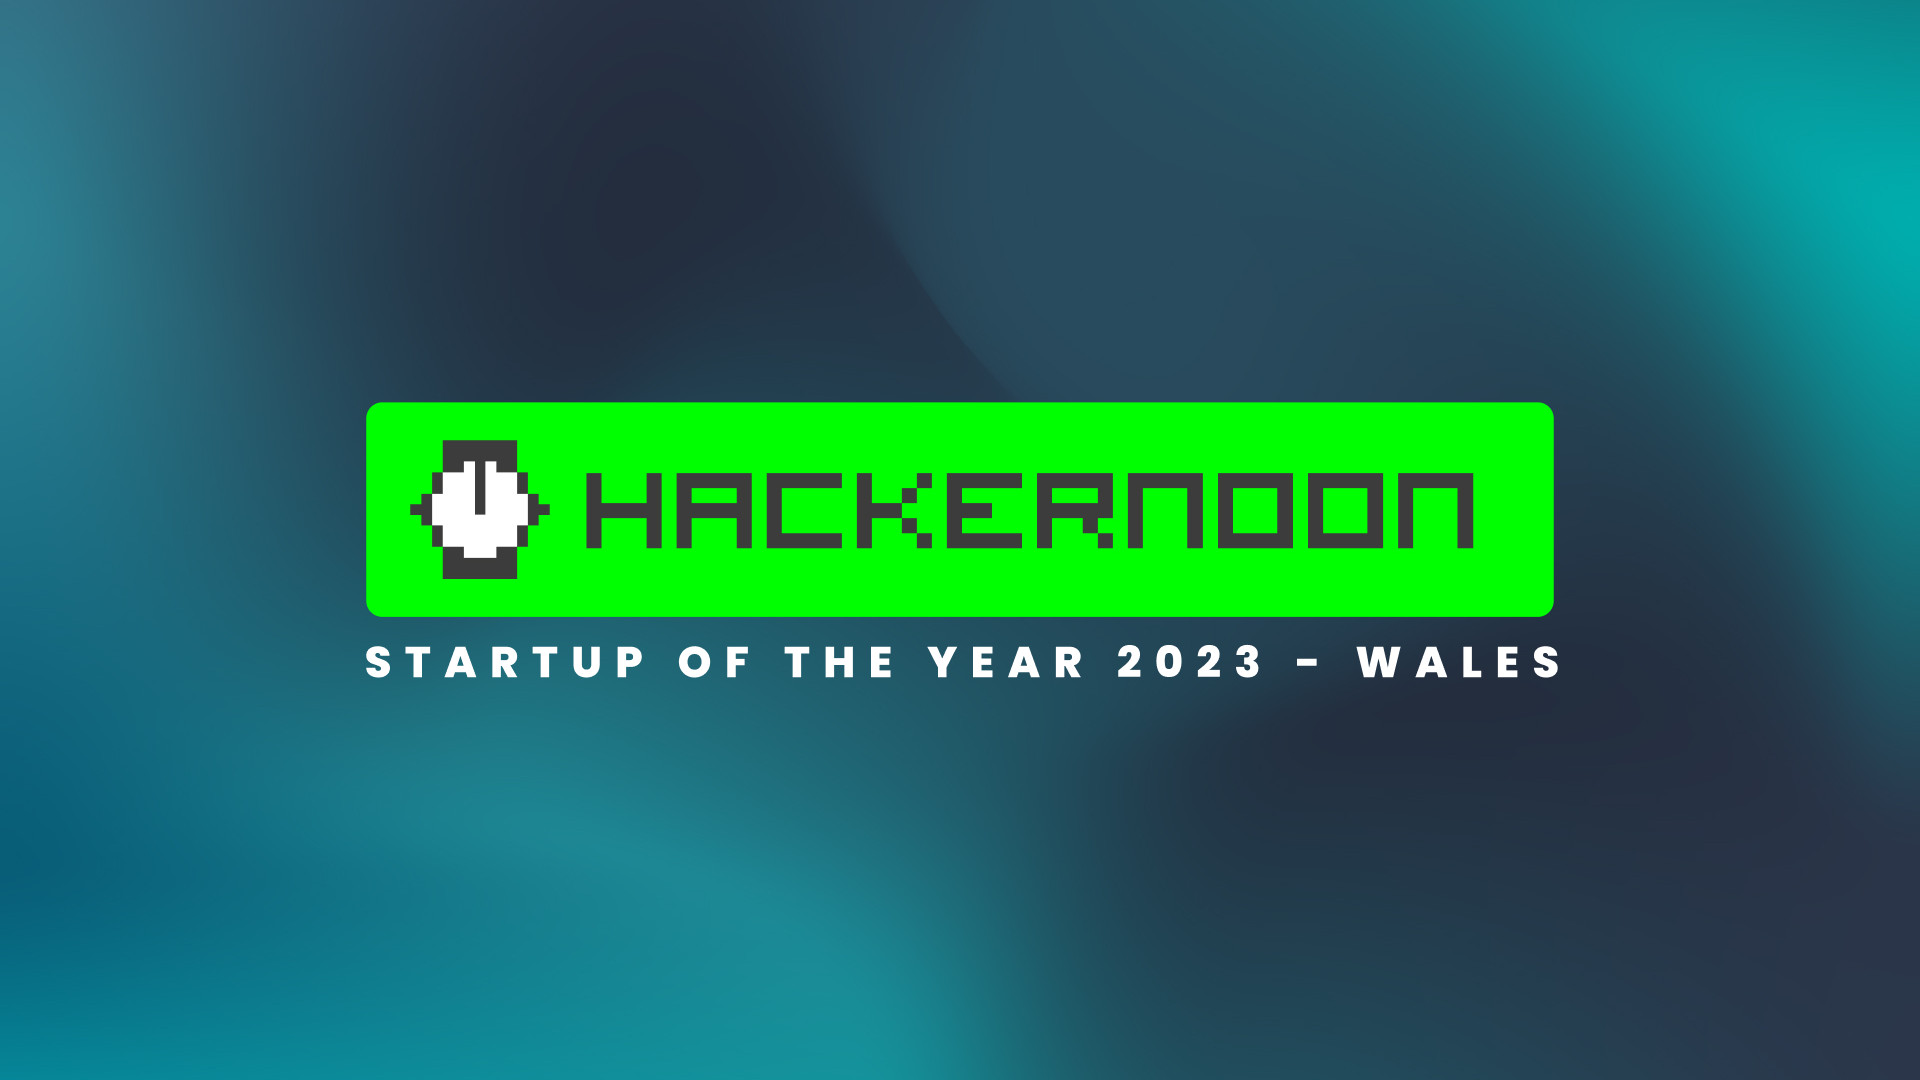 We won! Easy Eatery is Hackernoon's Startup Of The Year 2023 for Wales!